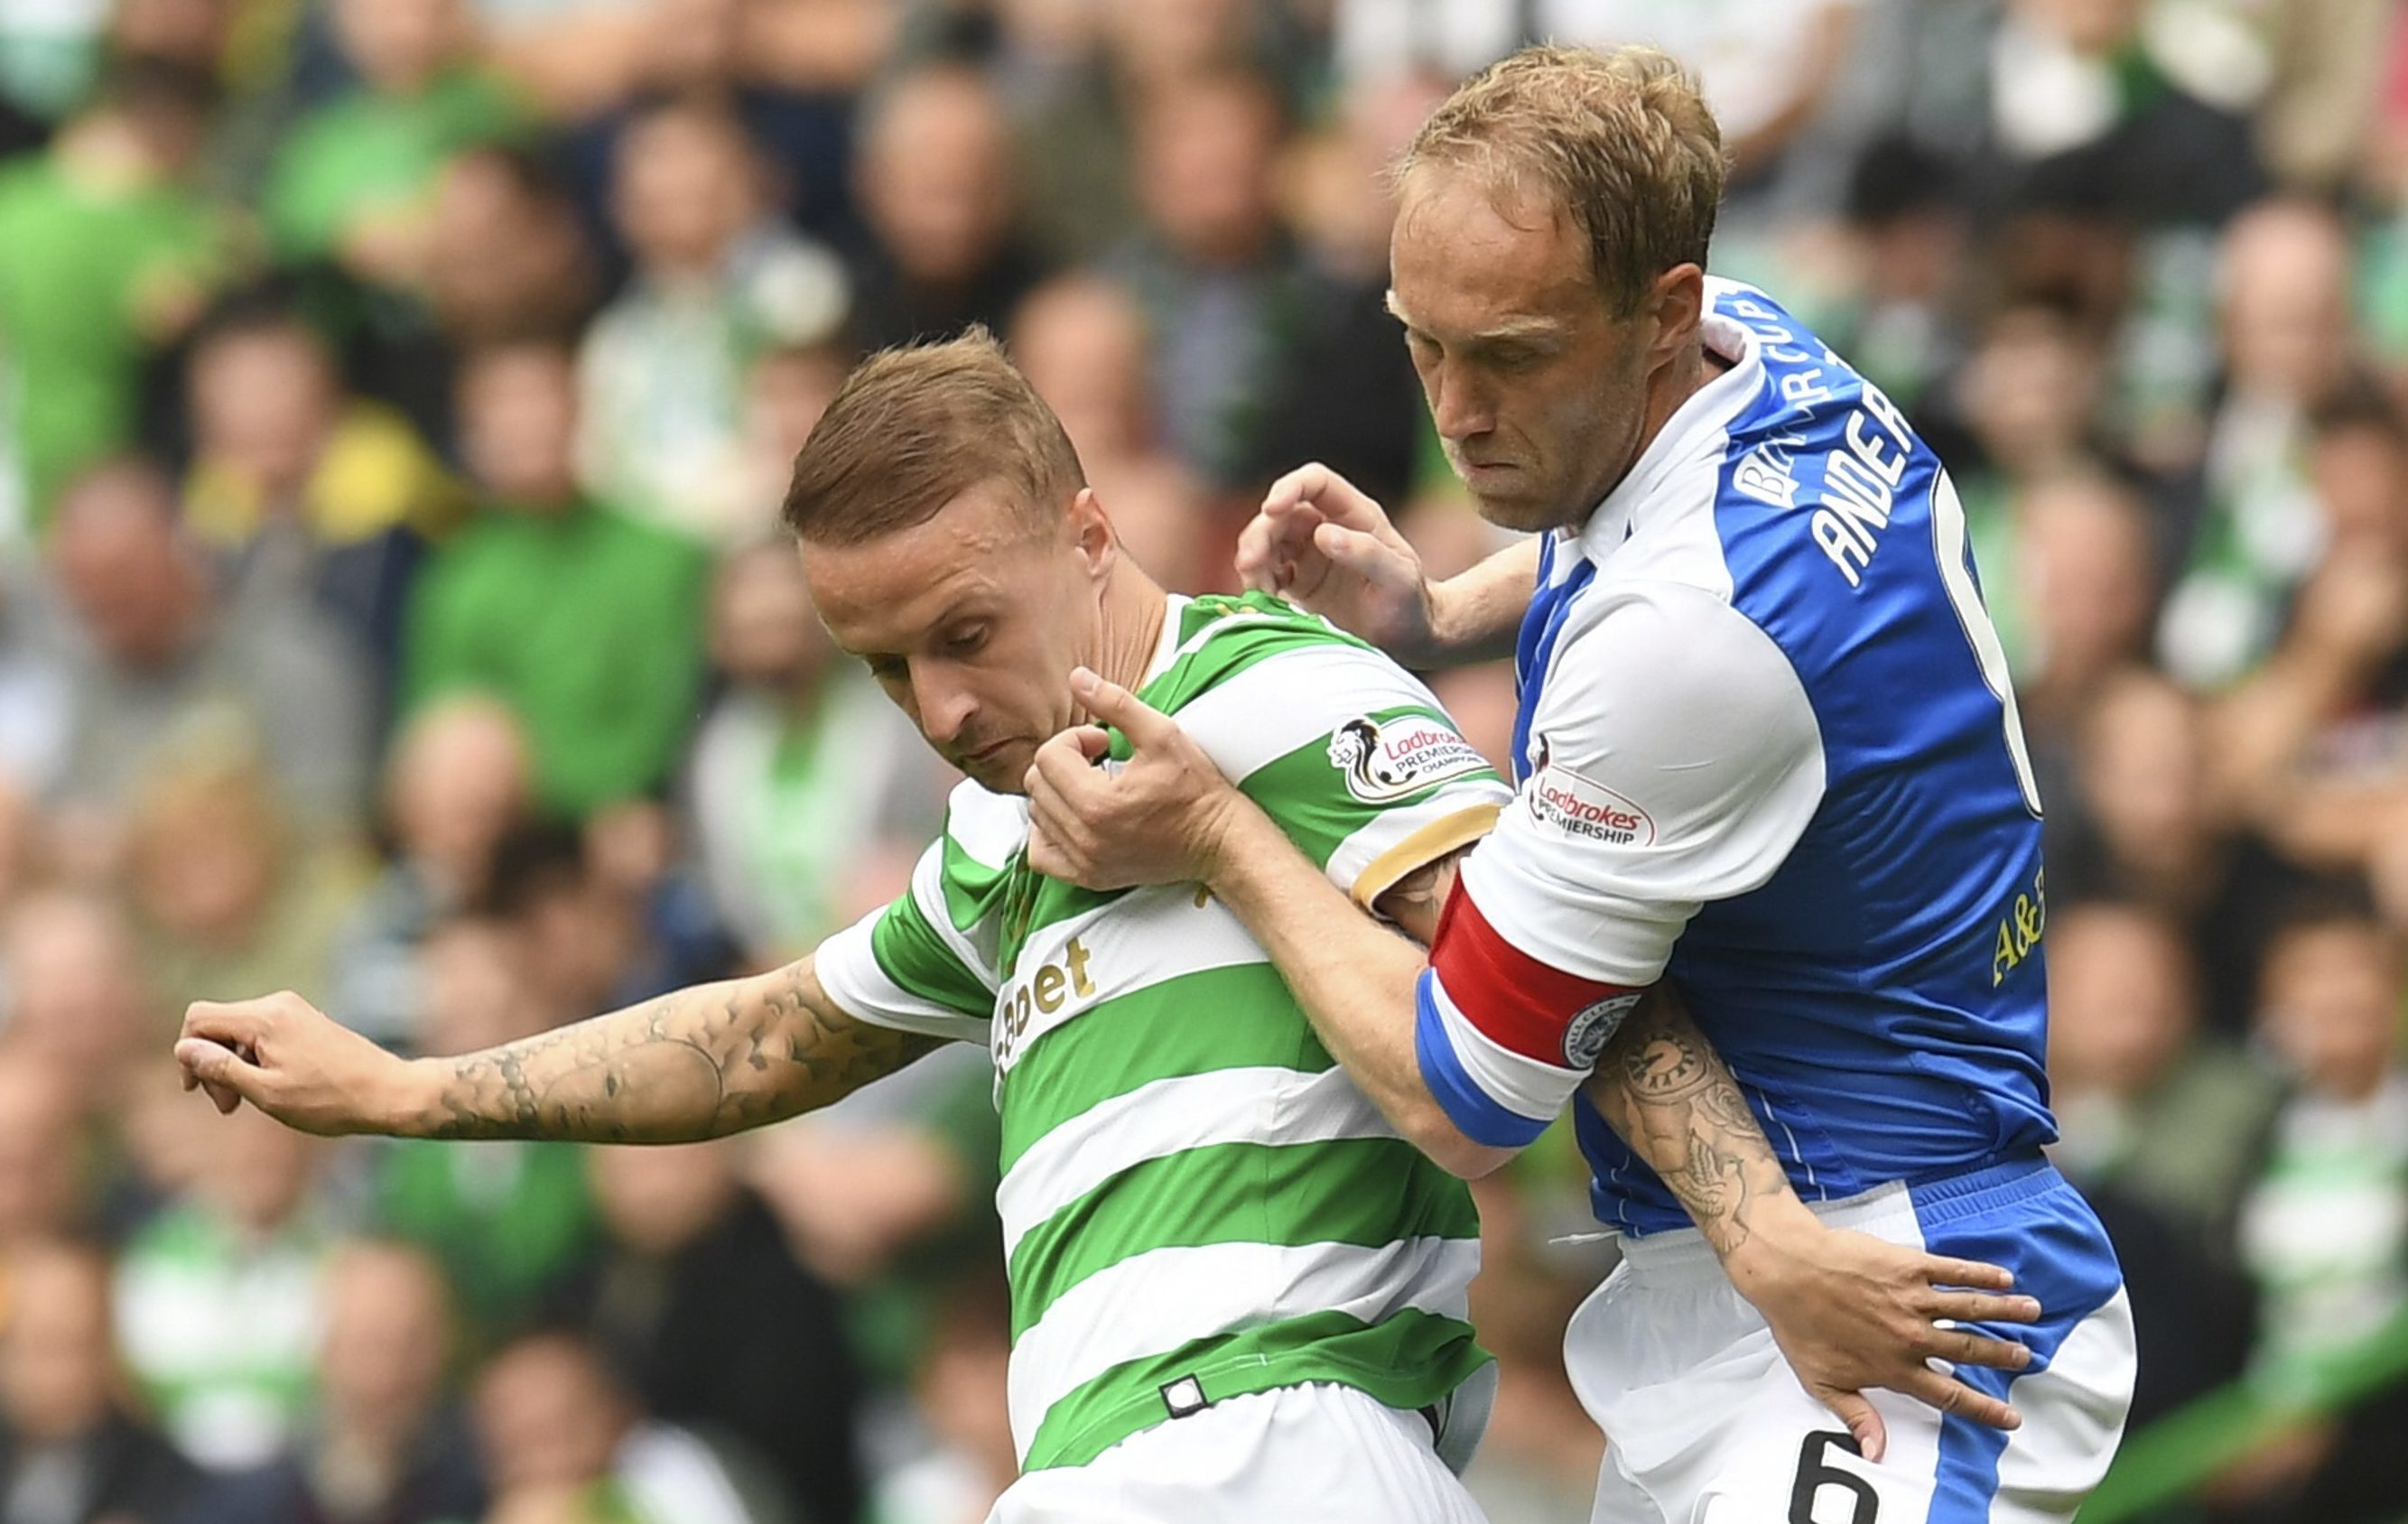 Steven Anderson will be back in action against Celtic again.